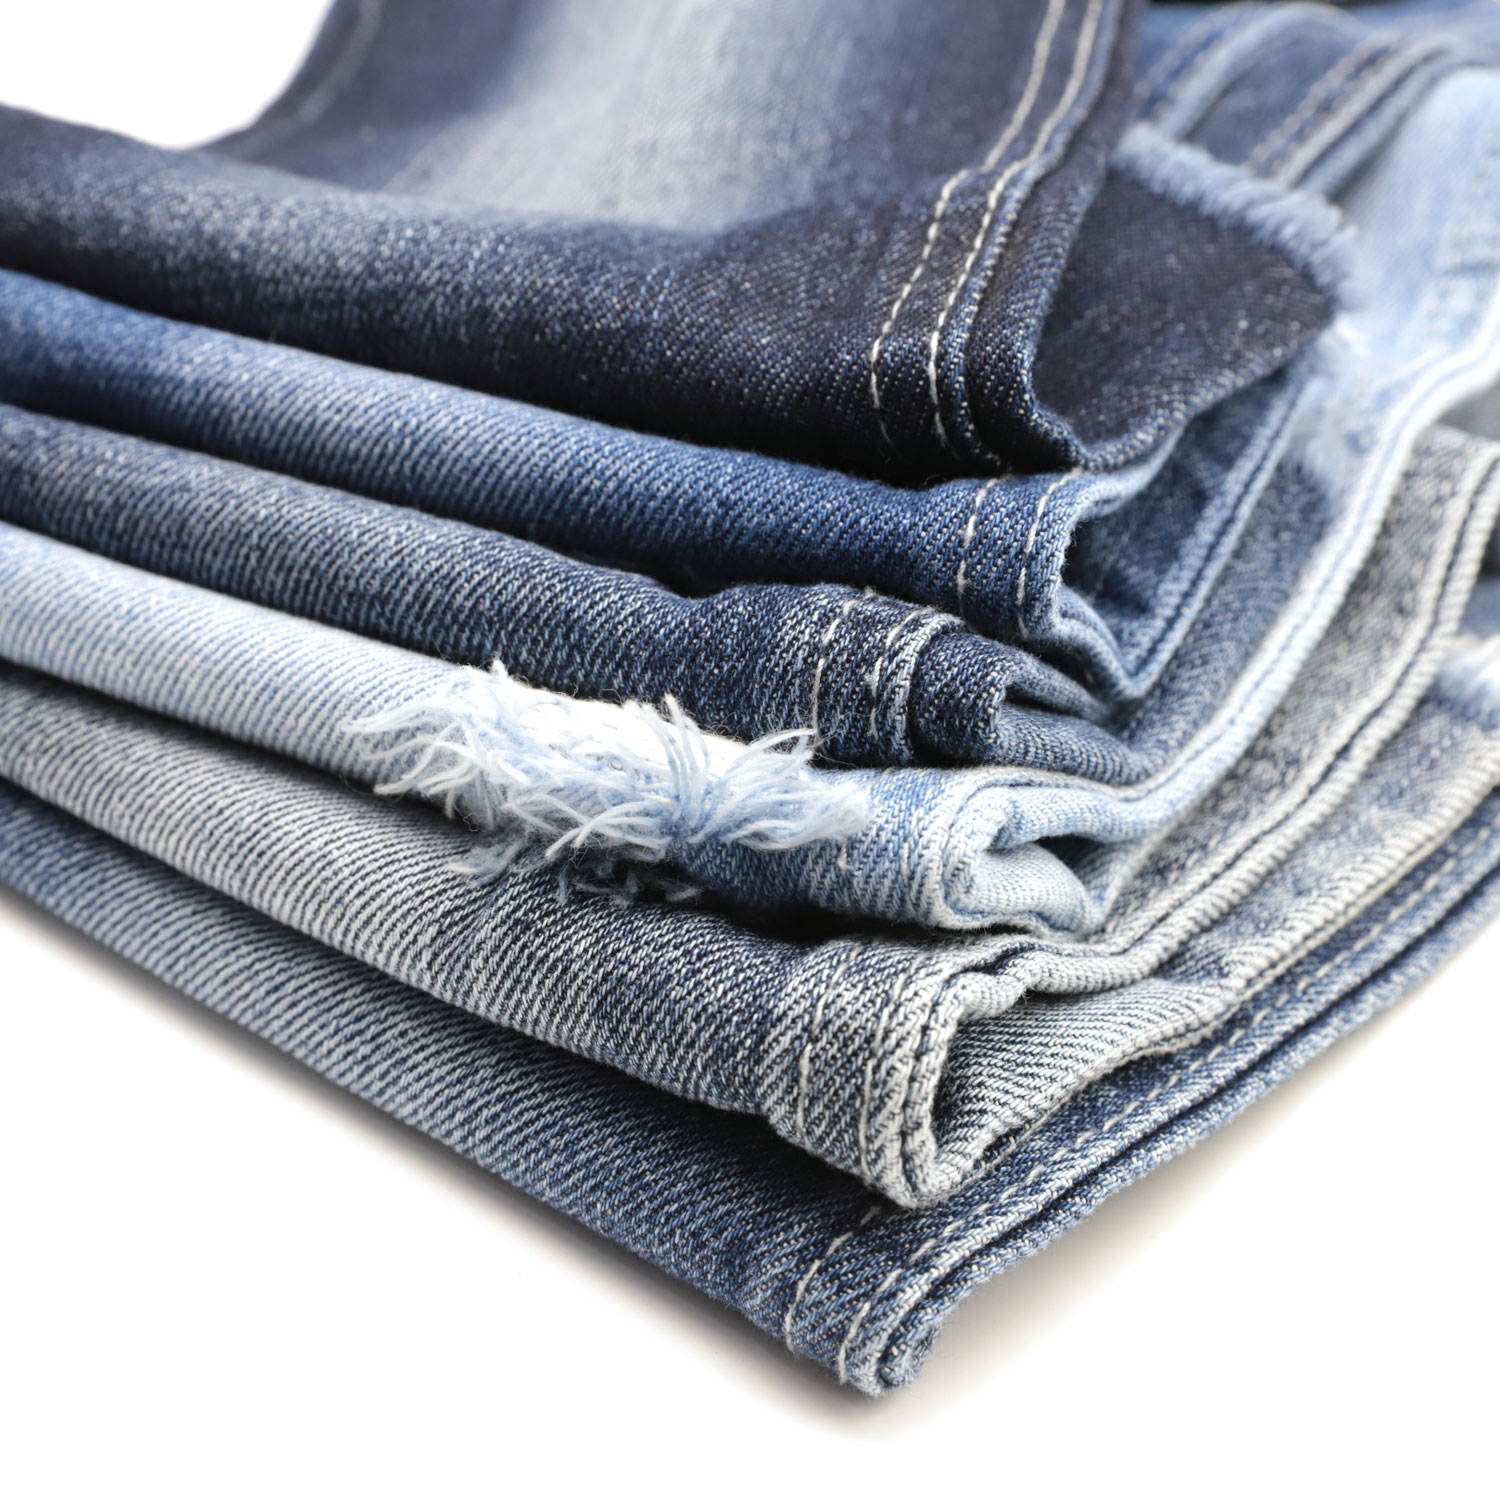 How to I Wash My Denim Jeans? 1